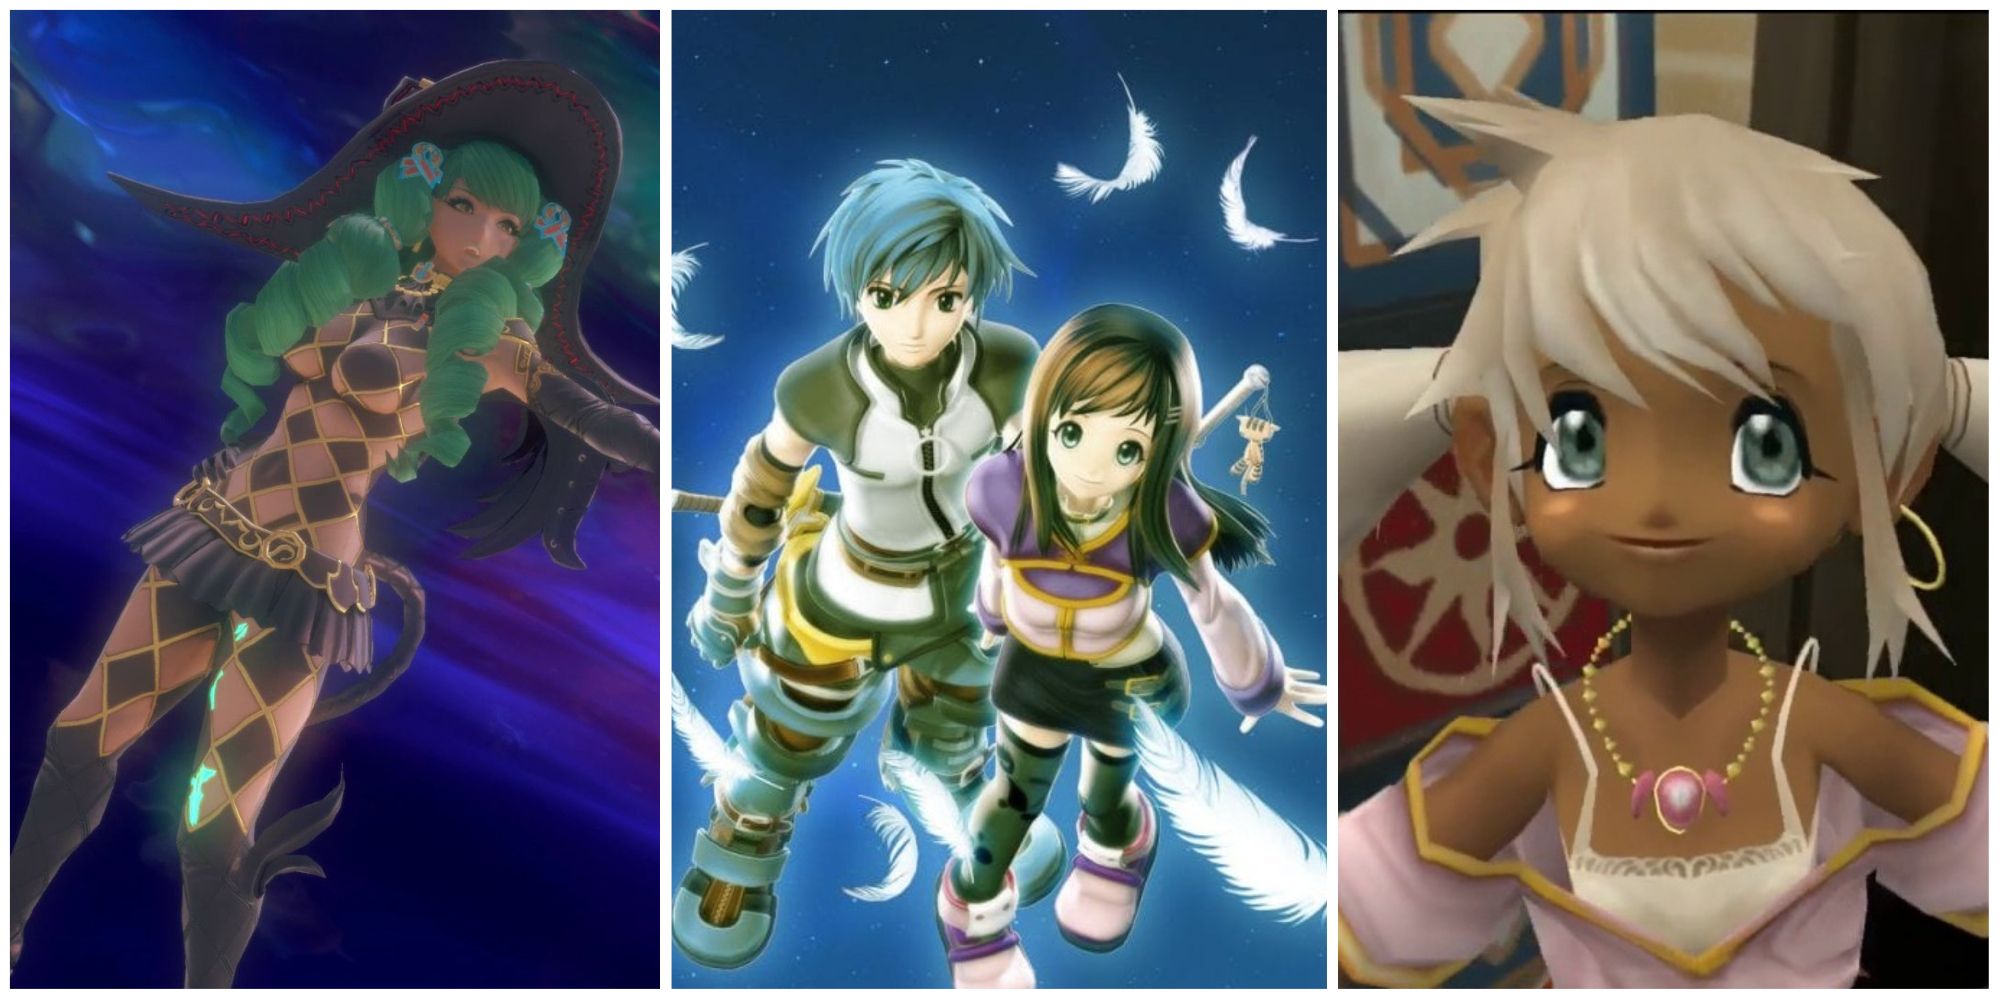 Star Ocean Character Title Collage Mage Fiore on Left, Fayt and Sophia middle Peppita right